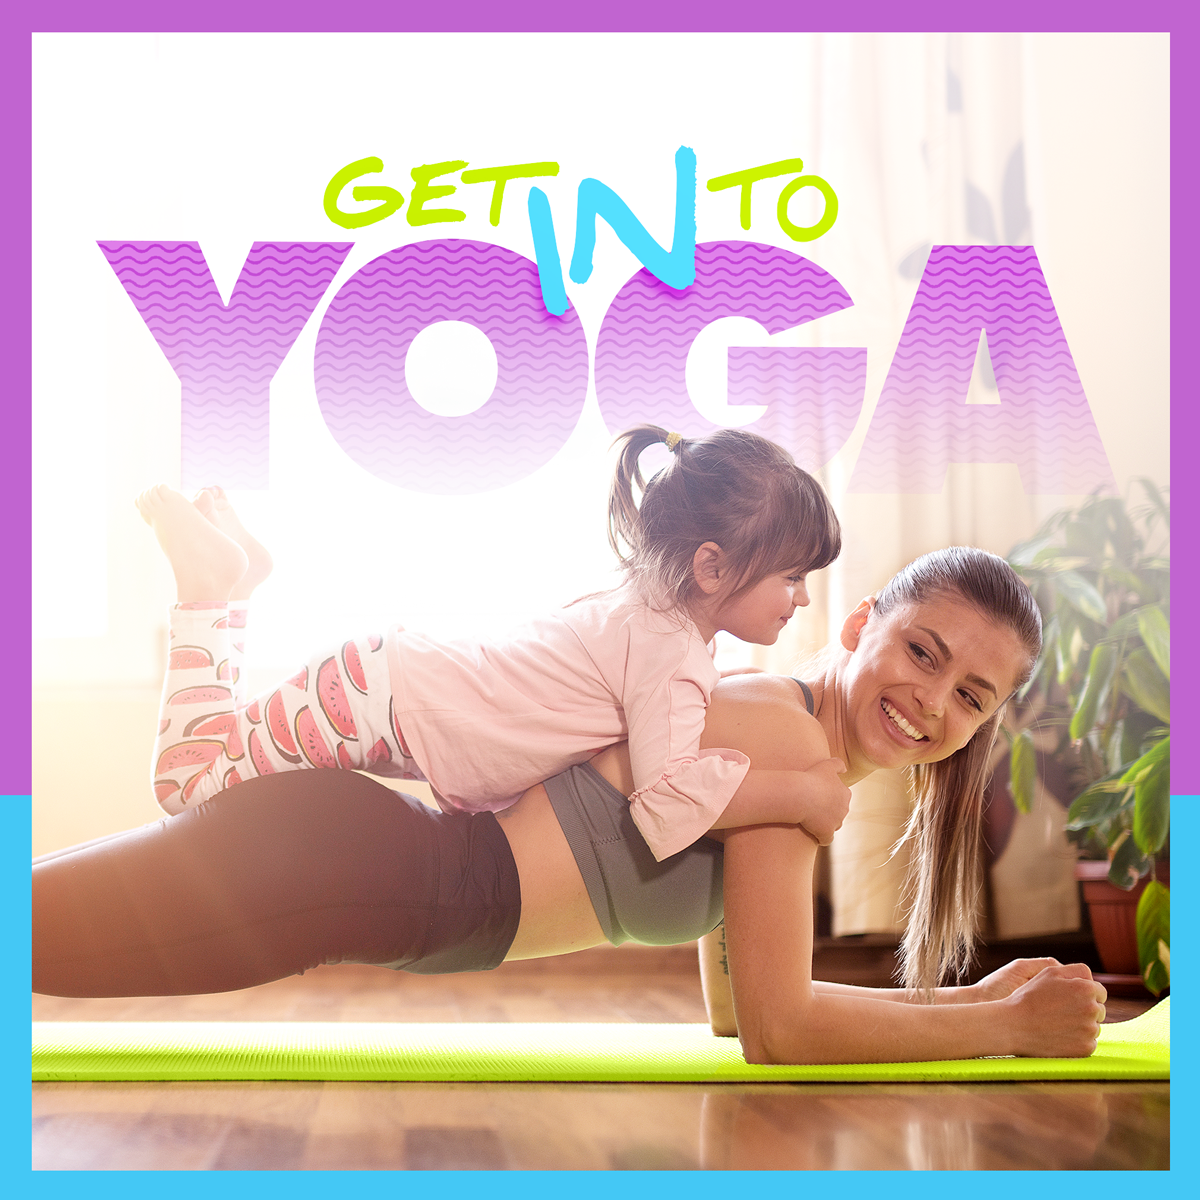 Get Into Yoga, Mother practicing yoga with daughter on back